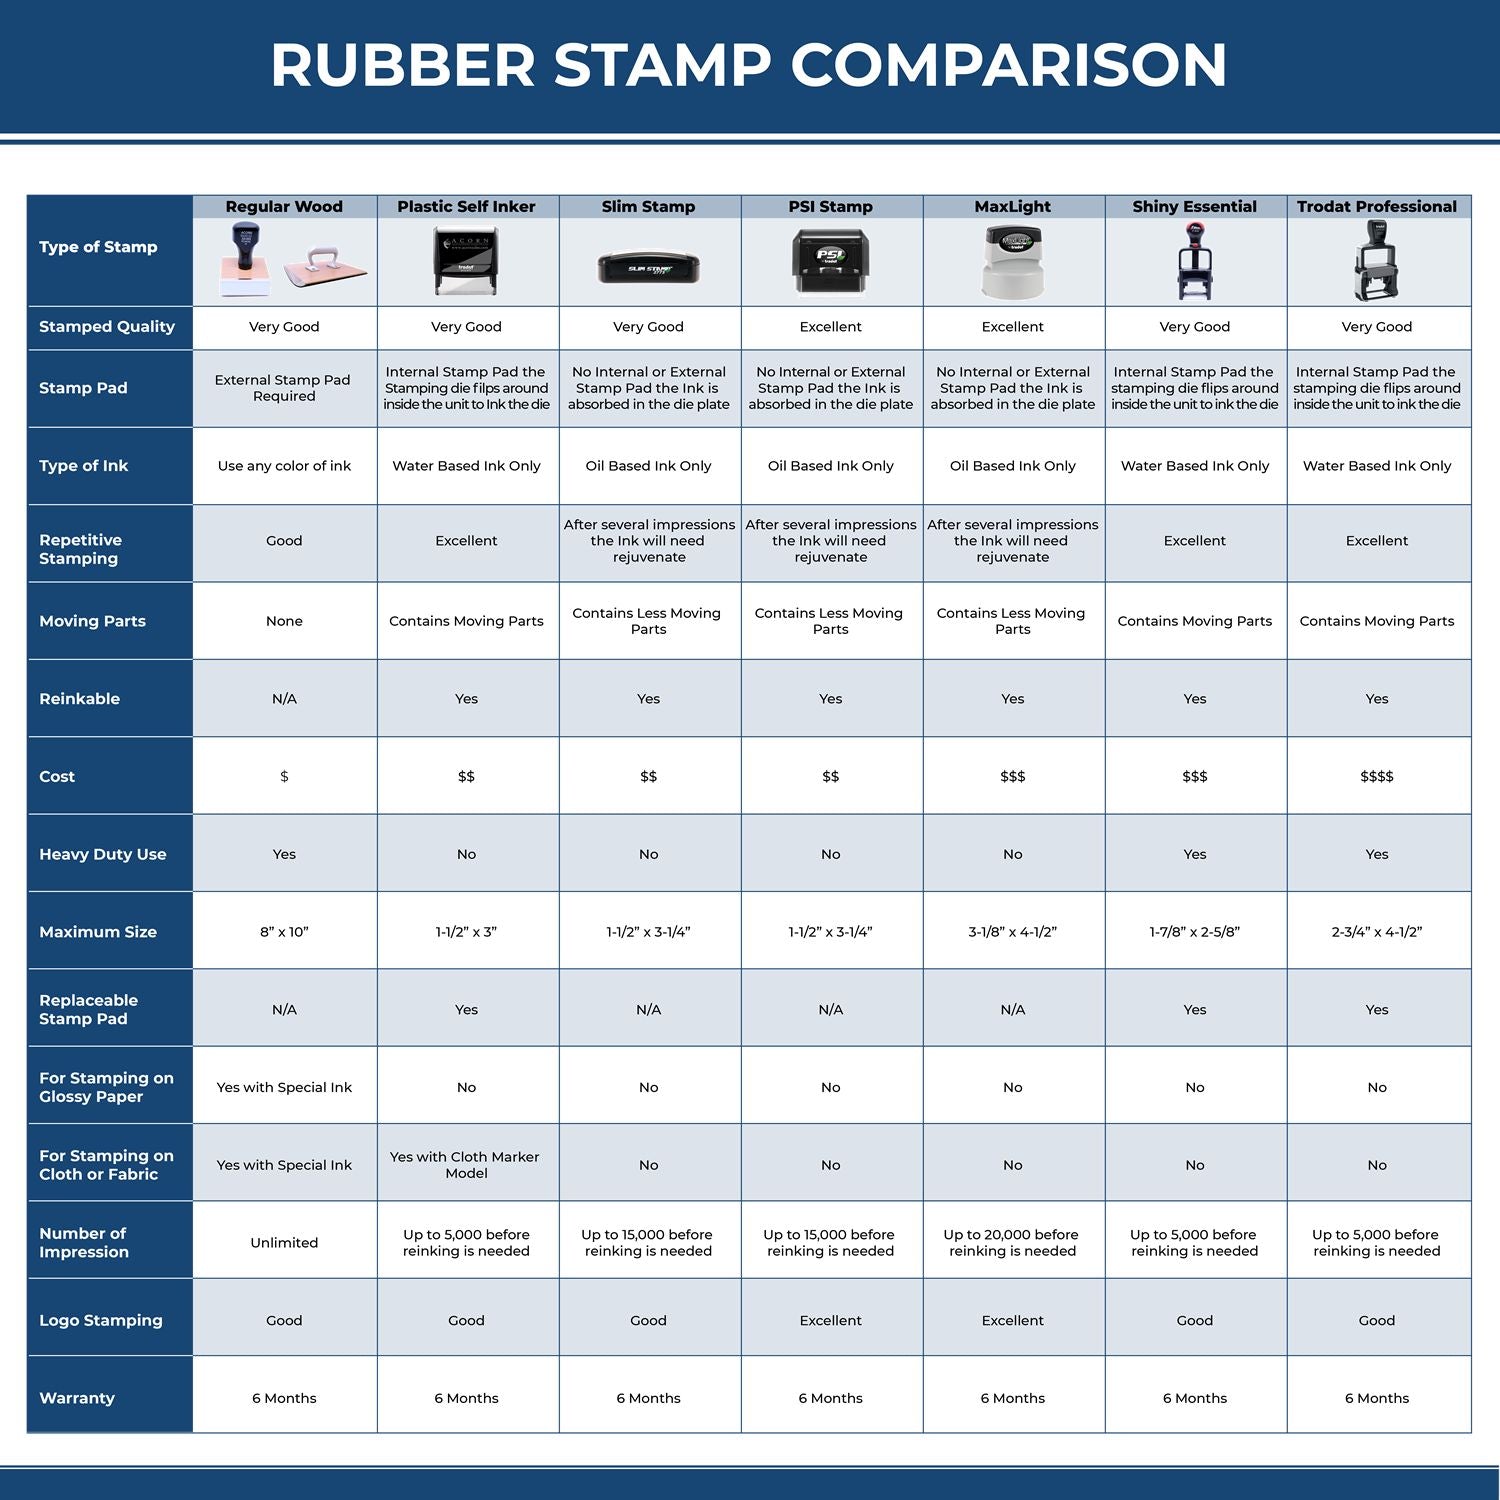 A comparison chart for the different types of mount models available for the Self-Inking Delaware PE Stamp.